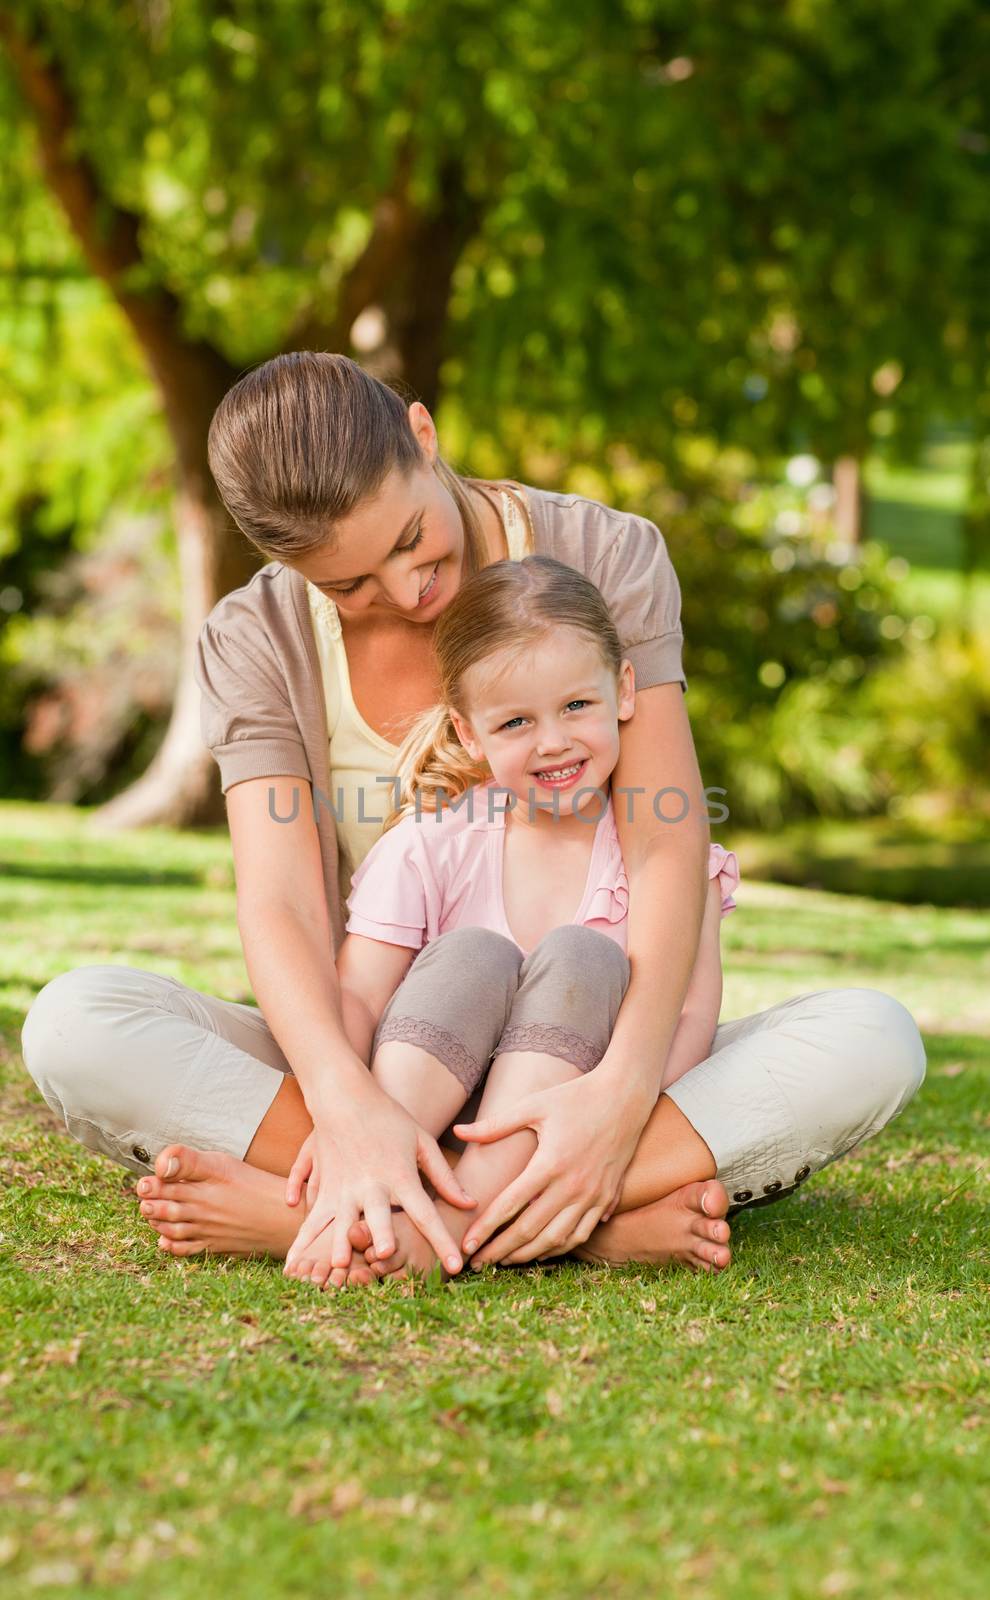 Daughter with her mother in the park during the summer